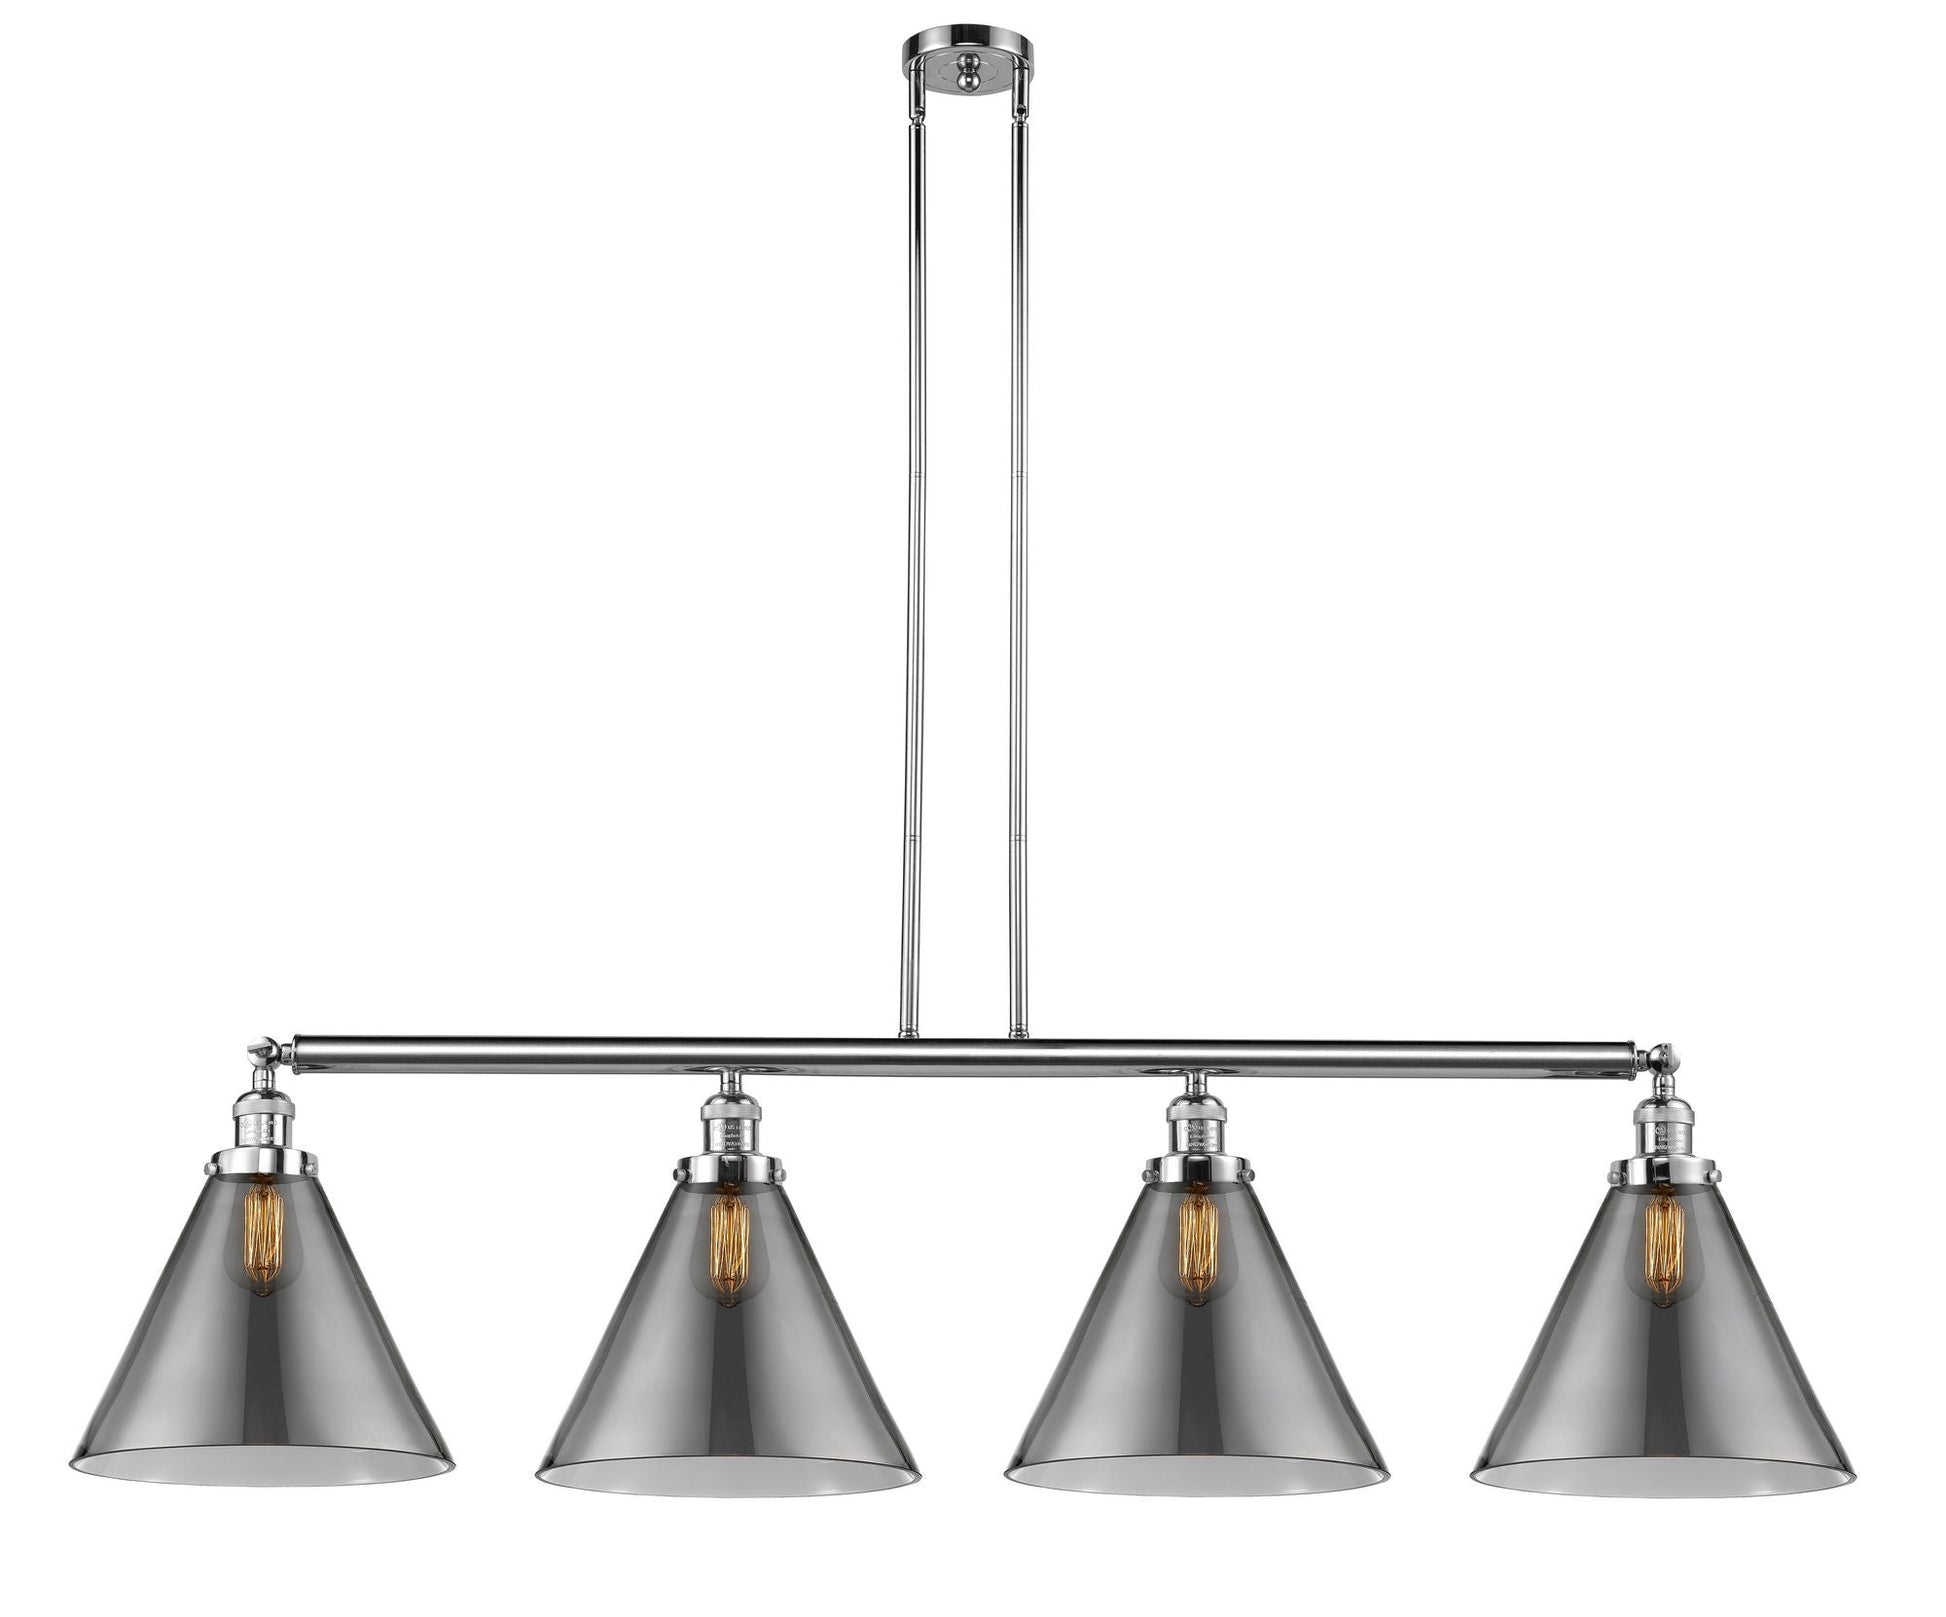 214-PC-G43-L 4-Light 56" Polished Chrome Island Light - Plated Smoke Cone 12" Glass - LED Bulb - Dimmensions: 56 x 12 x 14<br>Minimum Height : 24.25<br>Maximum Height : 48.25 - Sloped Ceiling Compatible: Yes